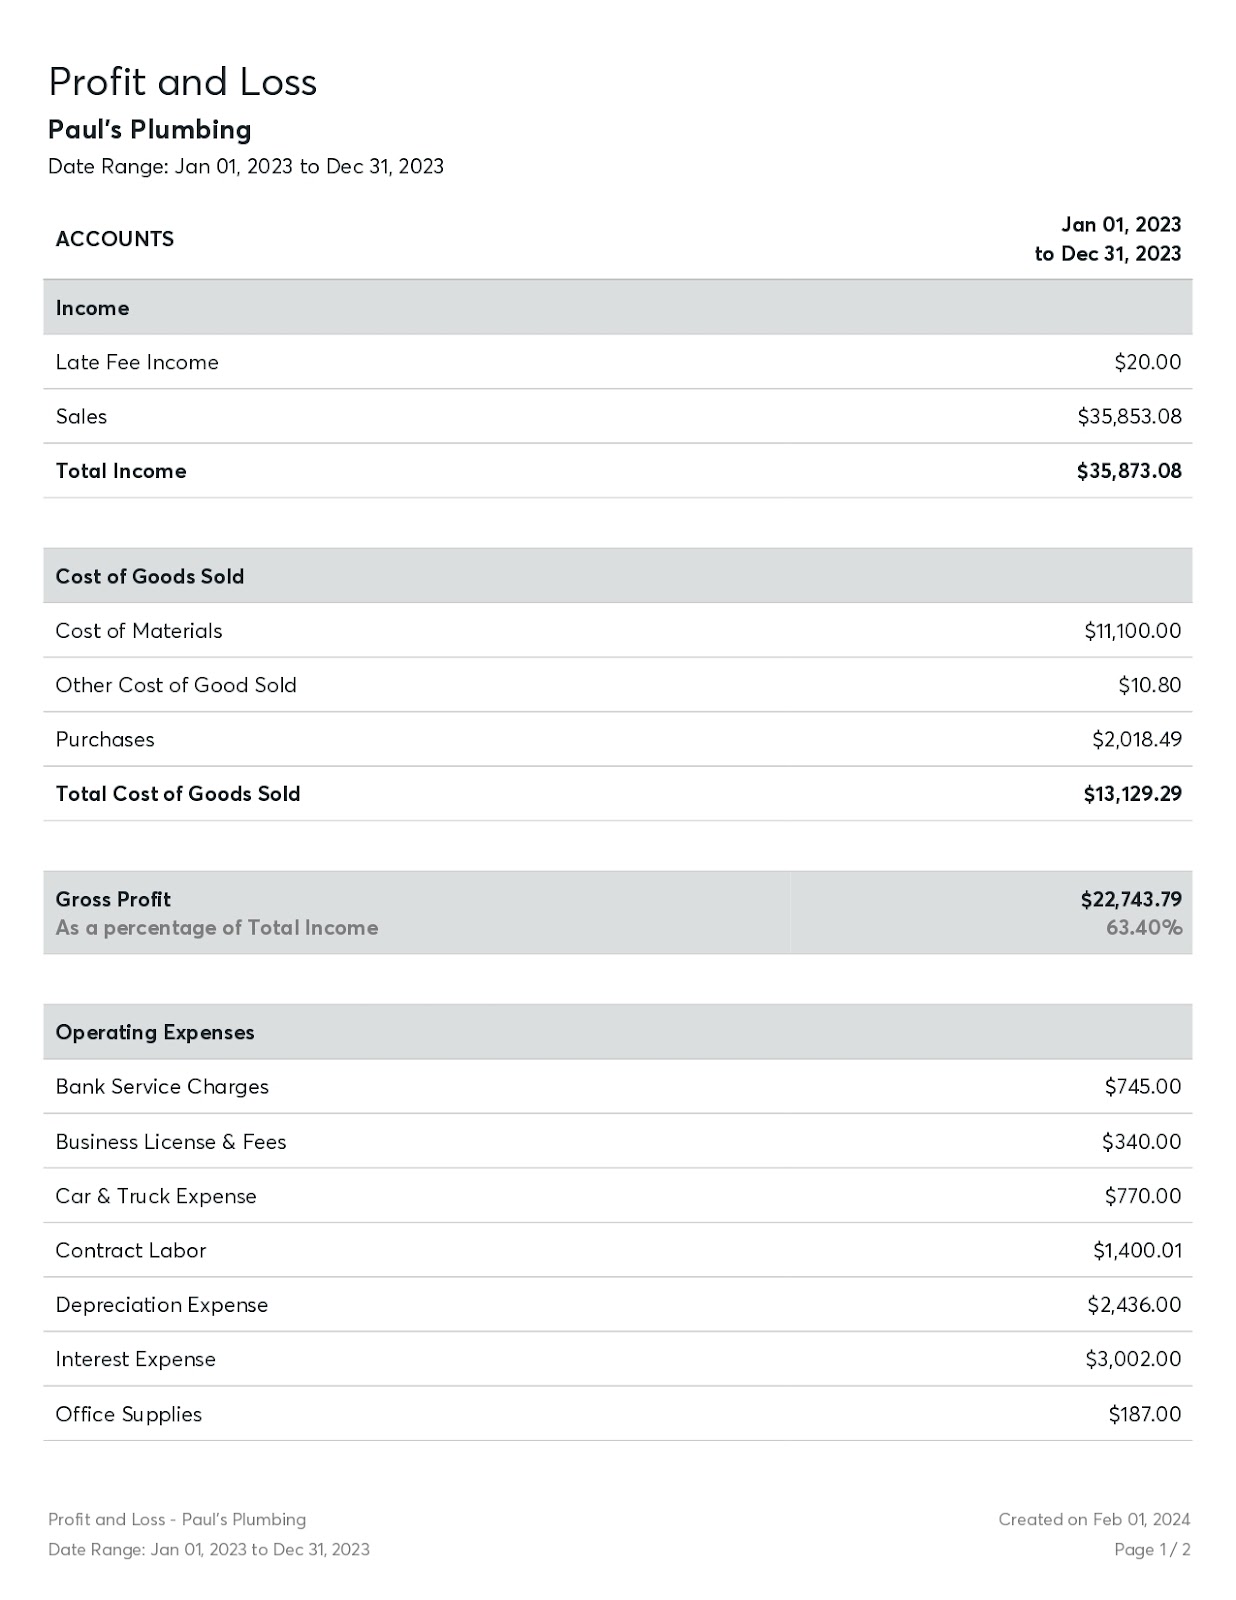 Page 1 of a sample profit and loss report for Paul's Plumbing